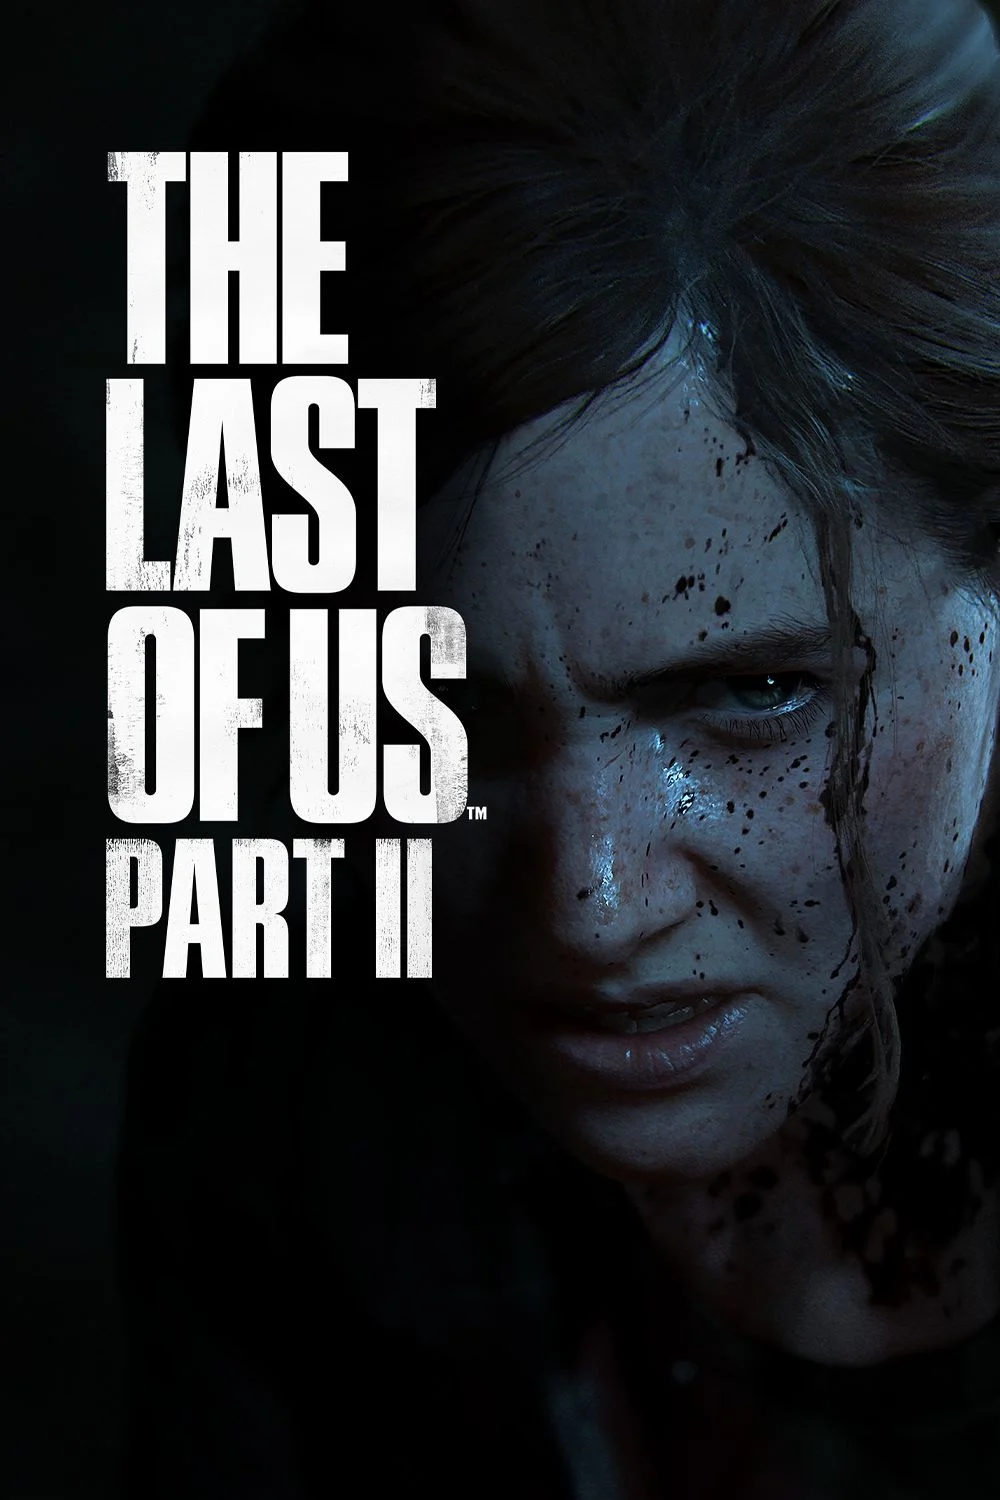 Upgrading to The Last of Us Part 2 Remastered on PS5